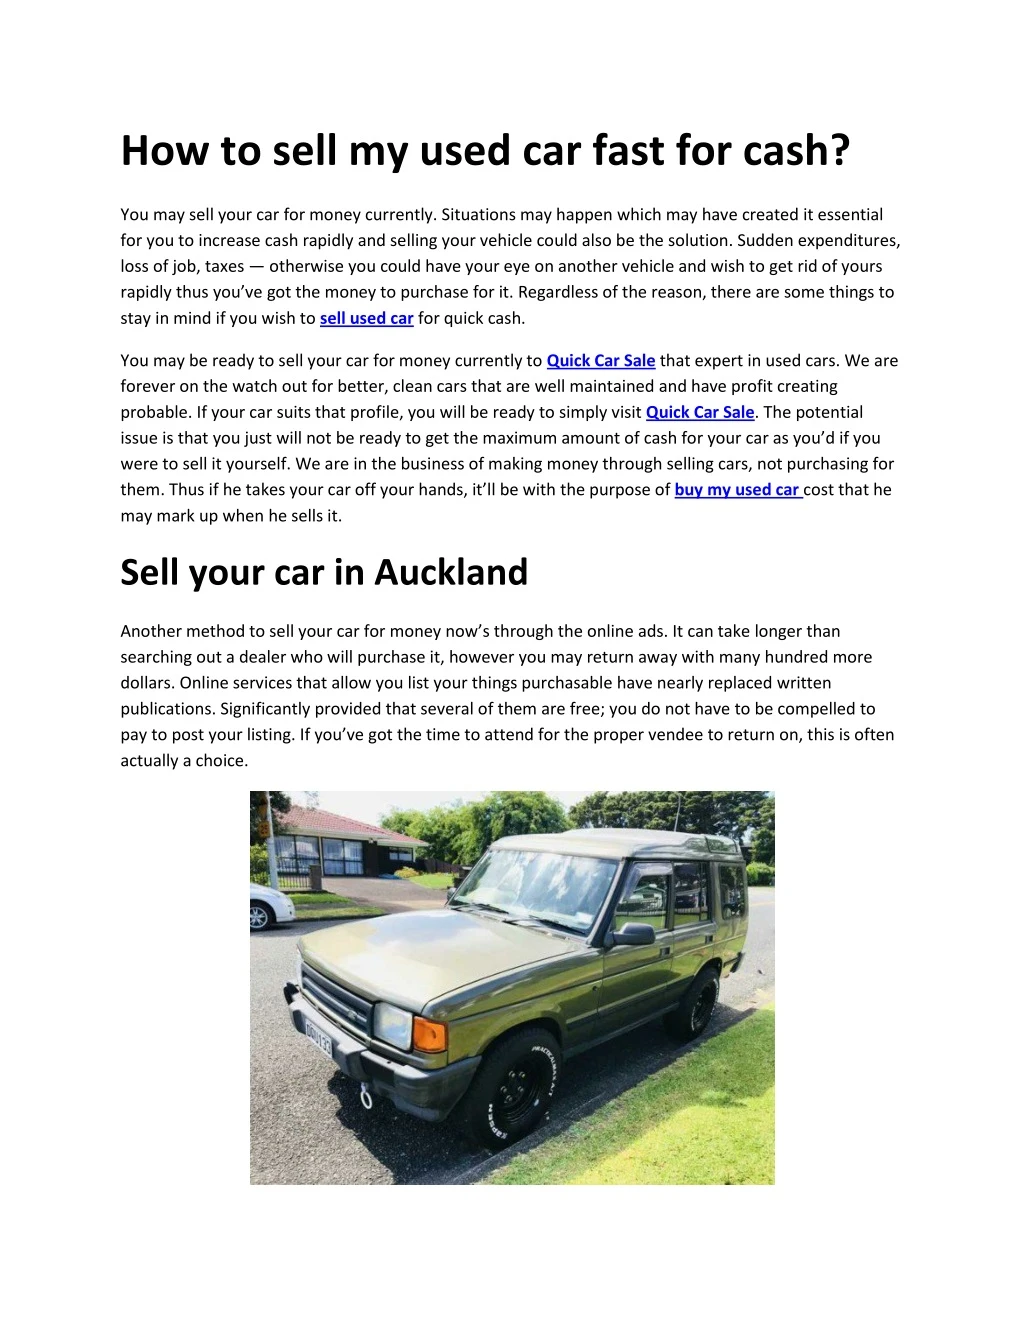 how to sell my used car fast for cash